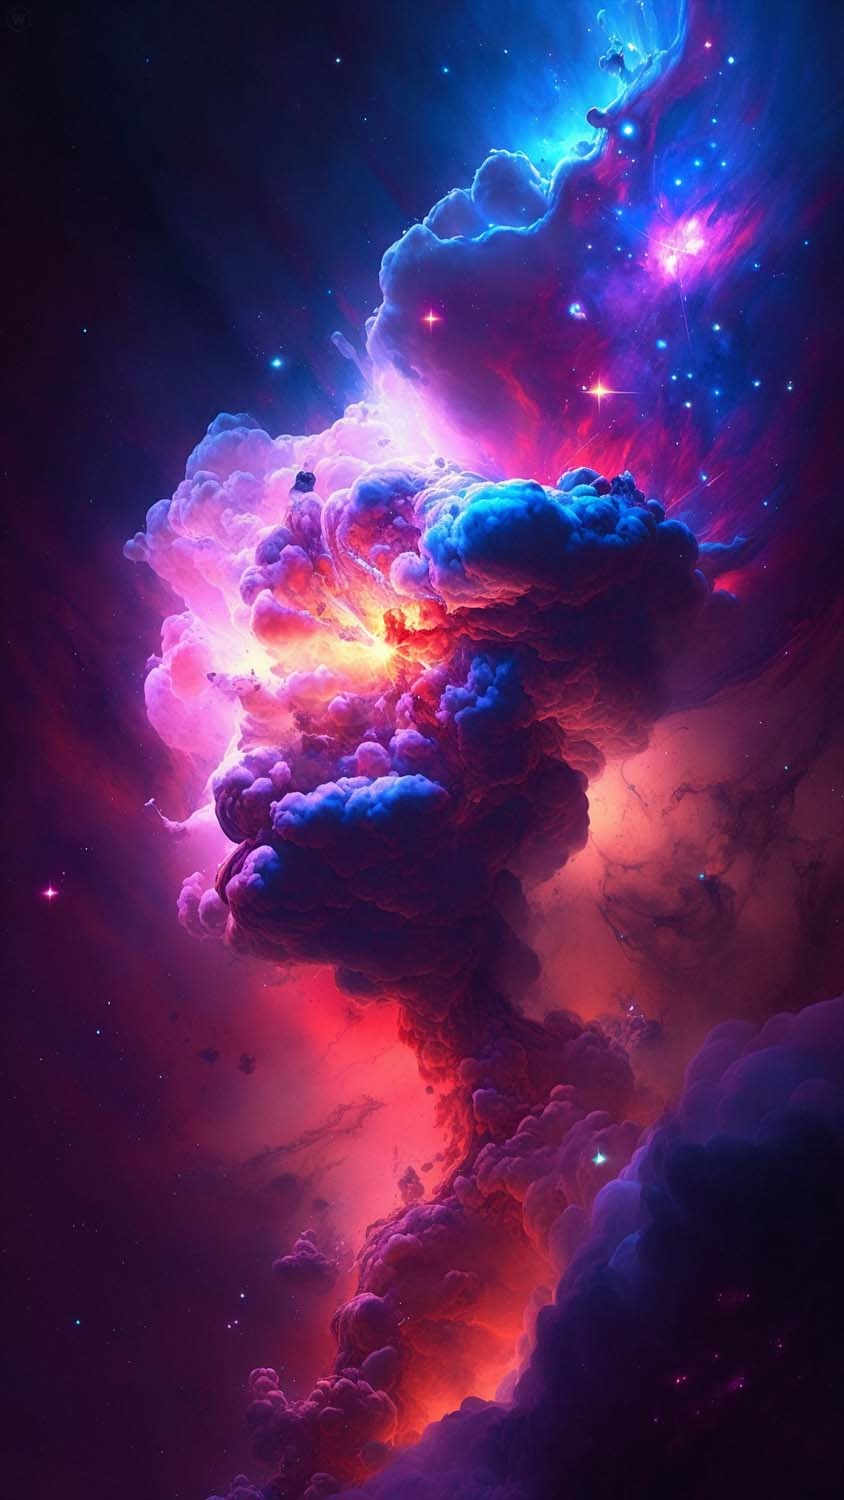 Nebula Clouds IPhone Wallpaper HD  IPhone Wallpapers